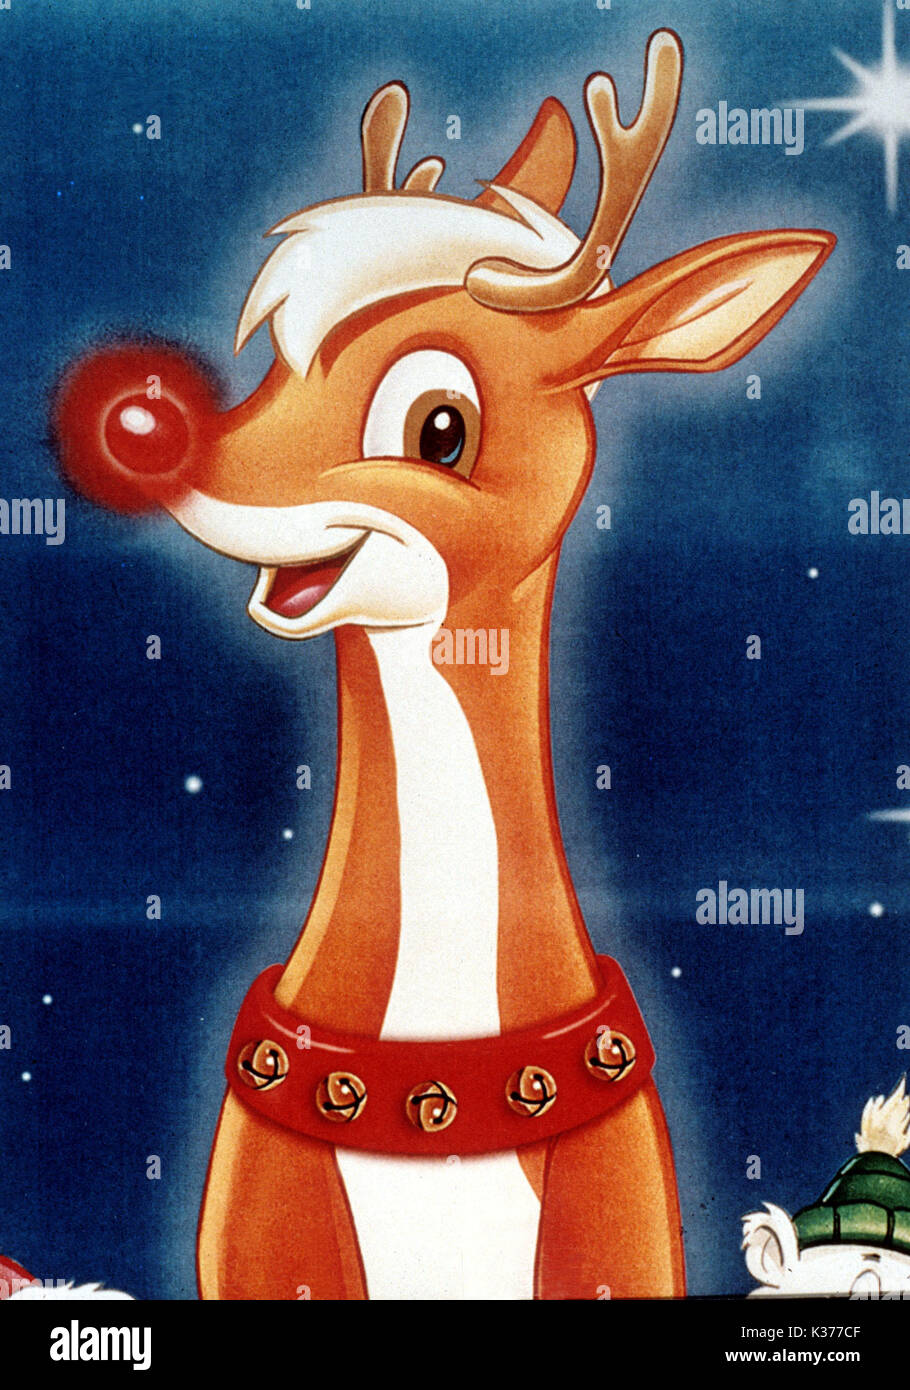 bestille tempo tælle RUDOLPH THE RED NOSED REINDEER A GOODTIMES ENTERTAIMENT RUDOLPH THE RED  NOSED REINDEER Date: 1998 Stock Photo - Alamy